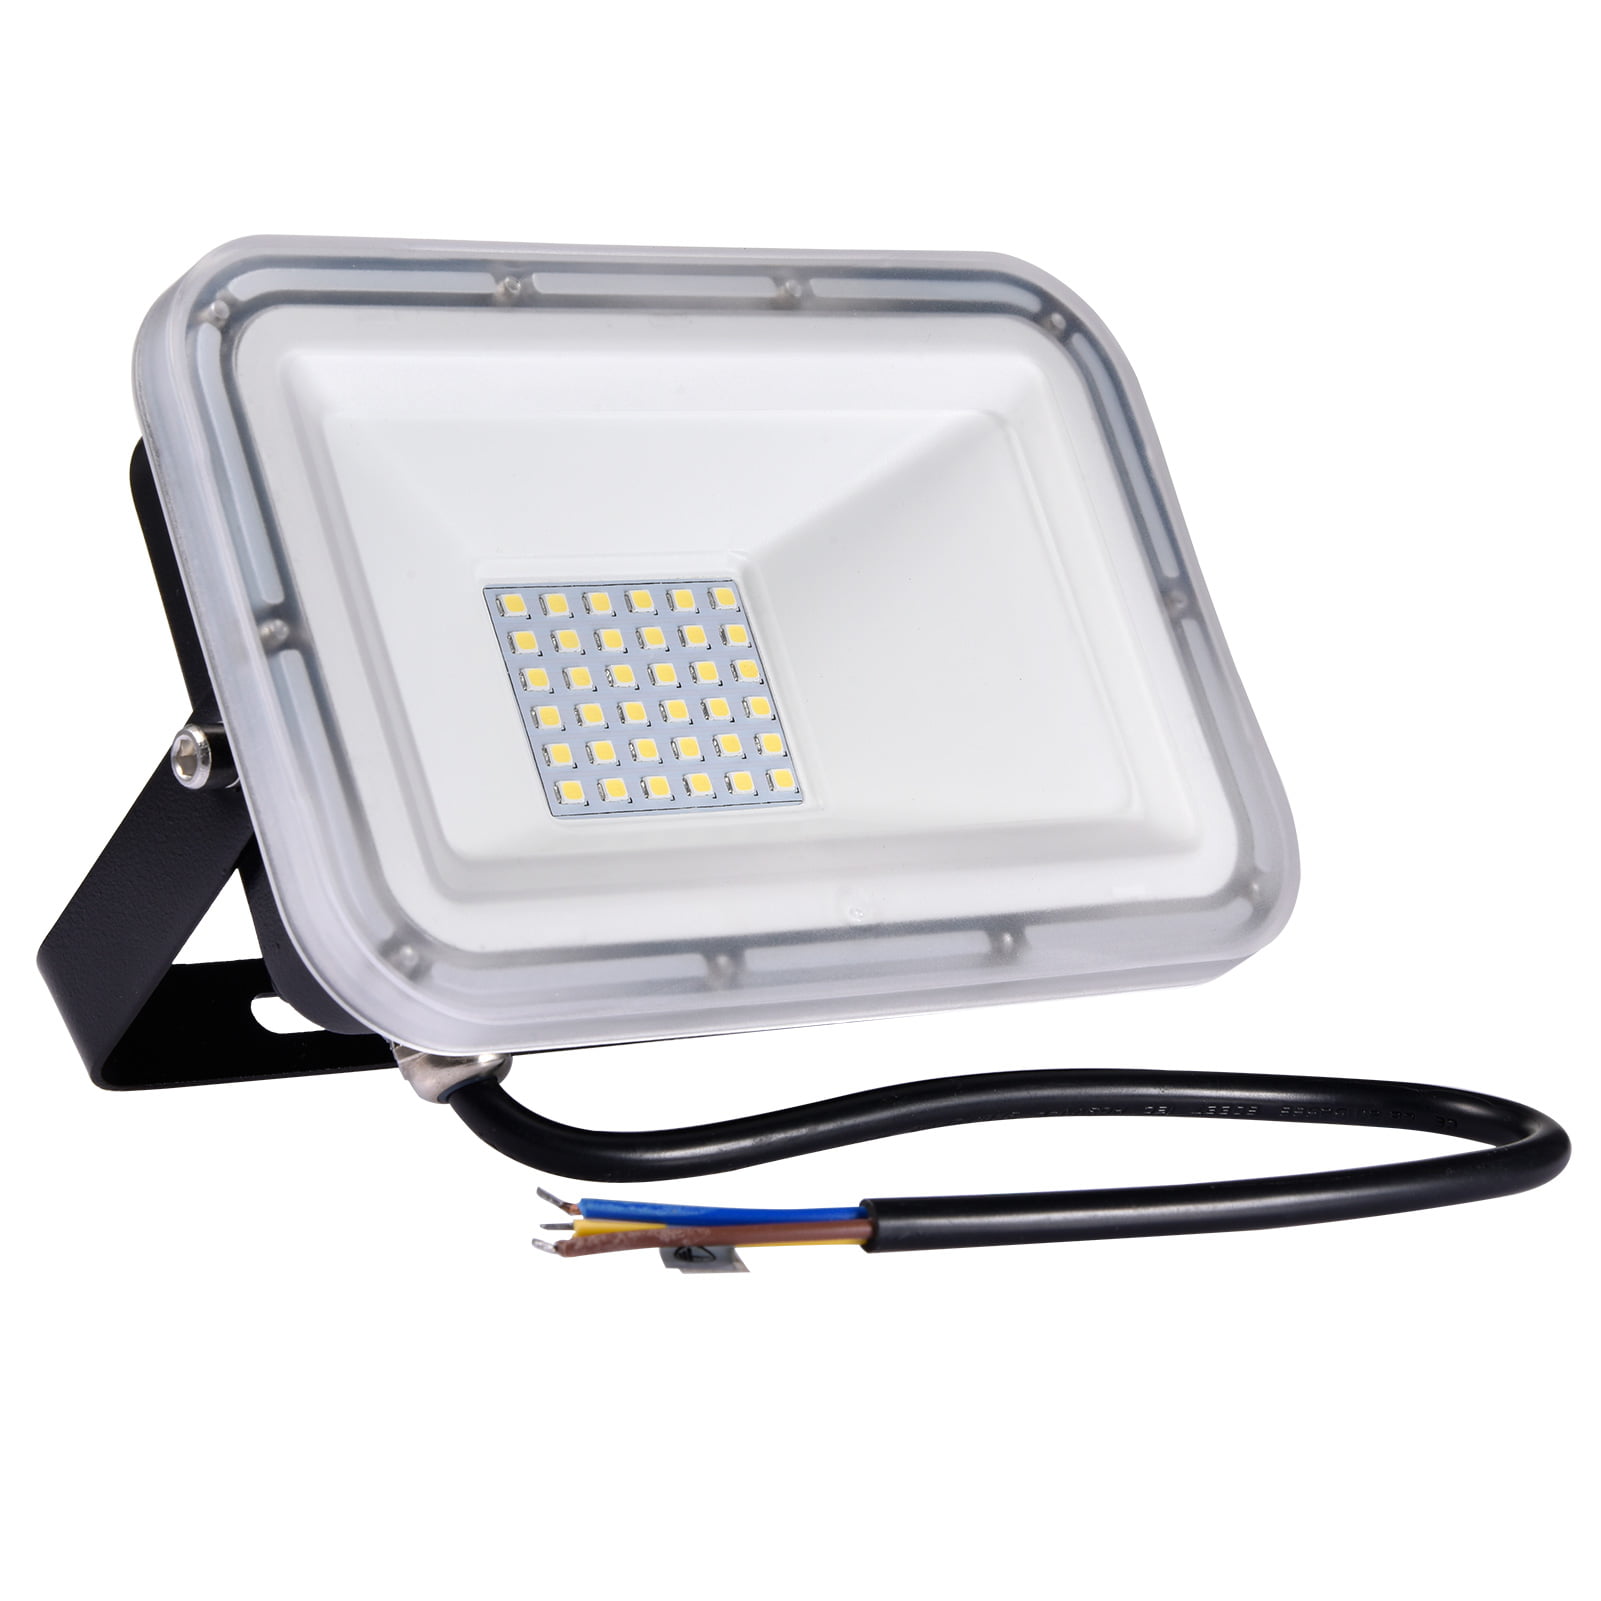 100W 200W 300W Super Bright LED Flood Light COB SMD Outdoor Security Lamp 